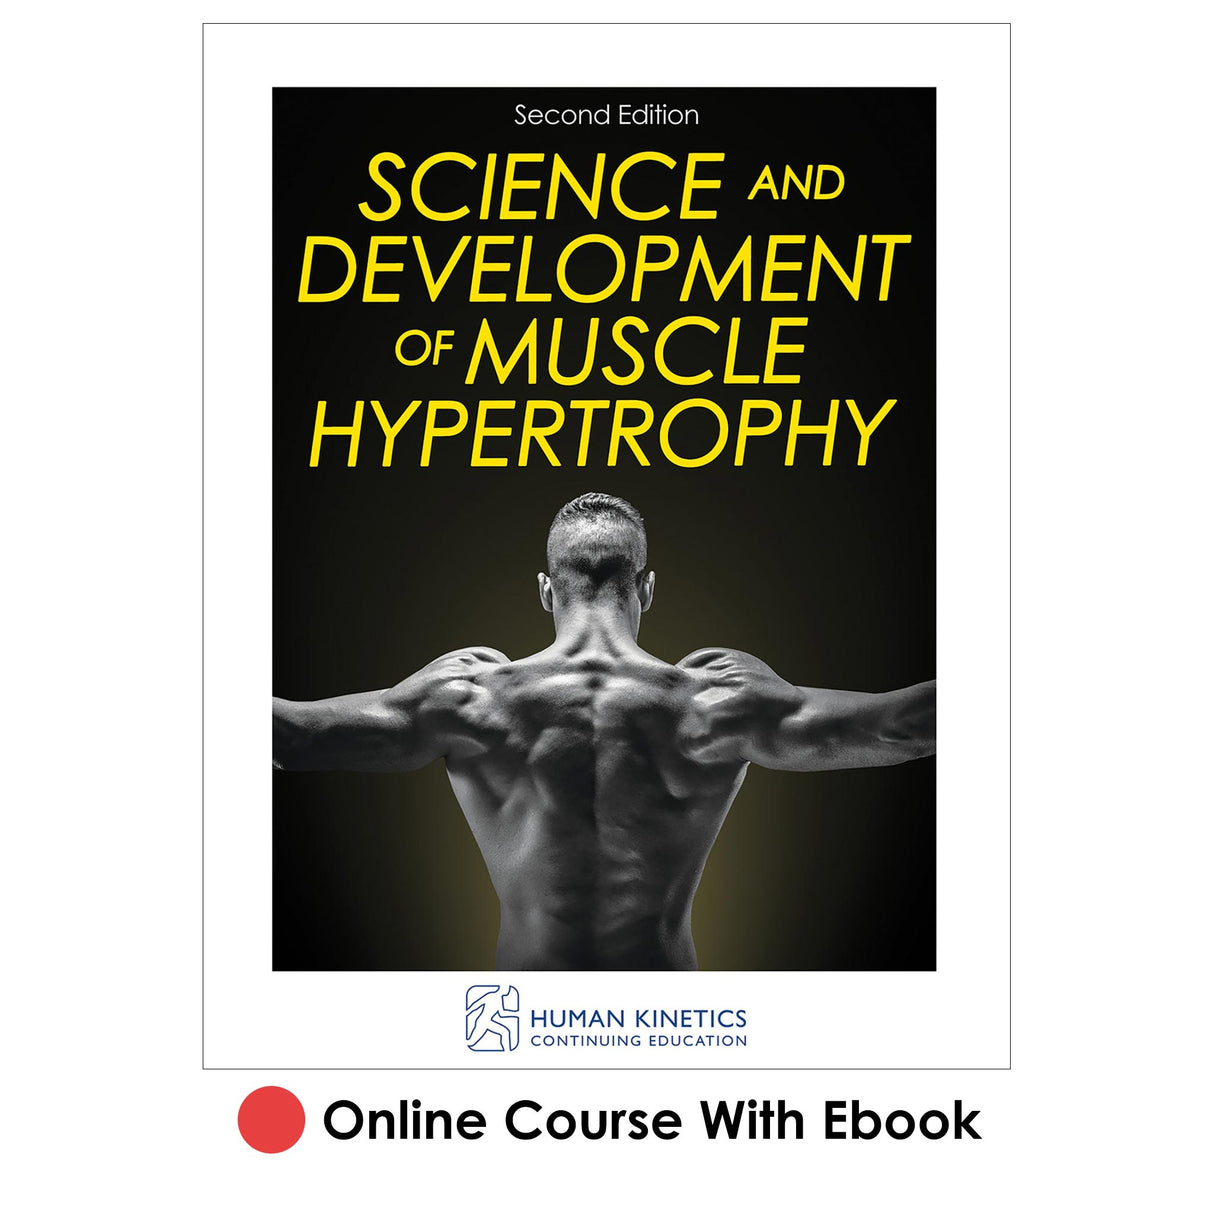 Science and Development of Muscle Hypertrophy 2nd Edition Online CE Course With Ebook